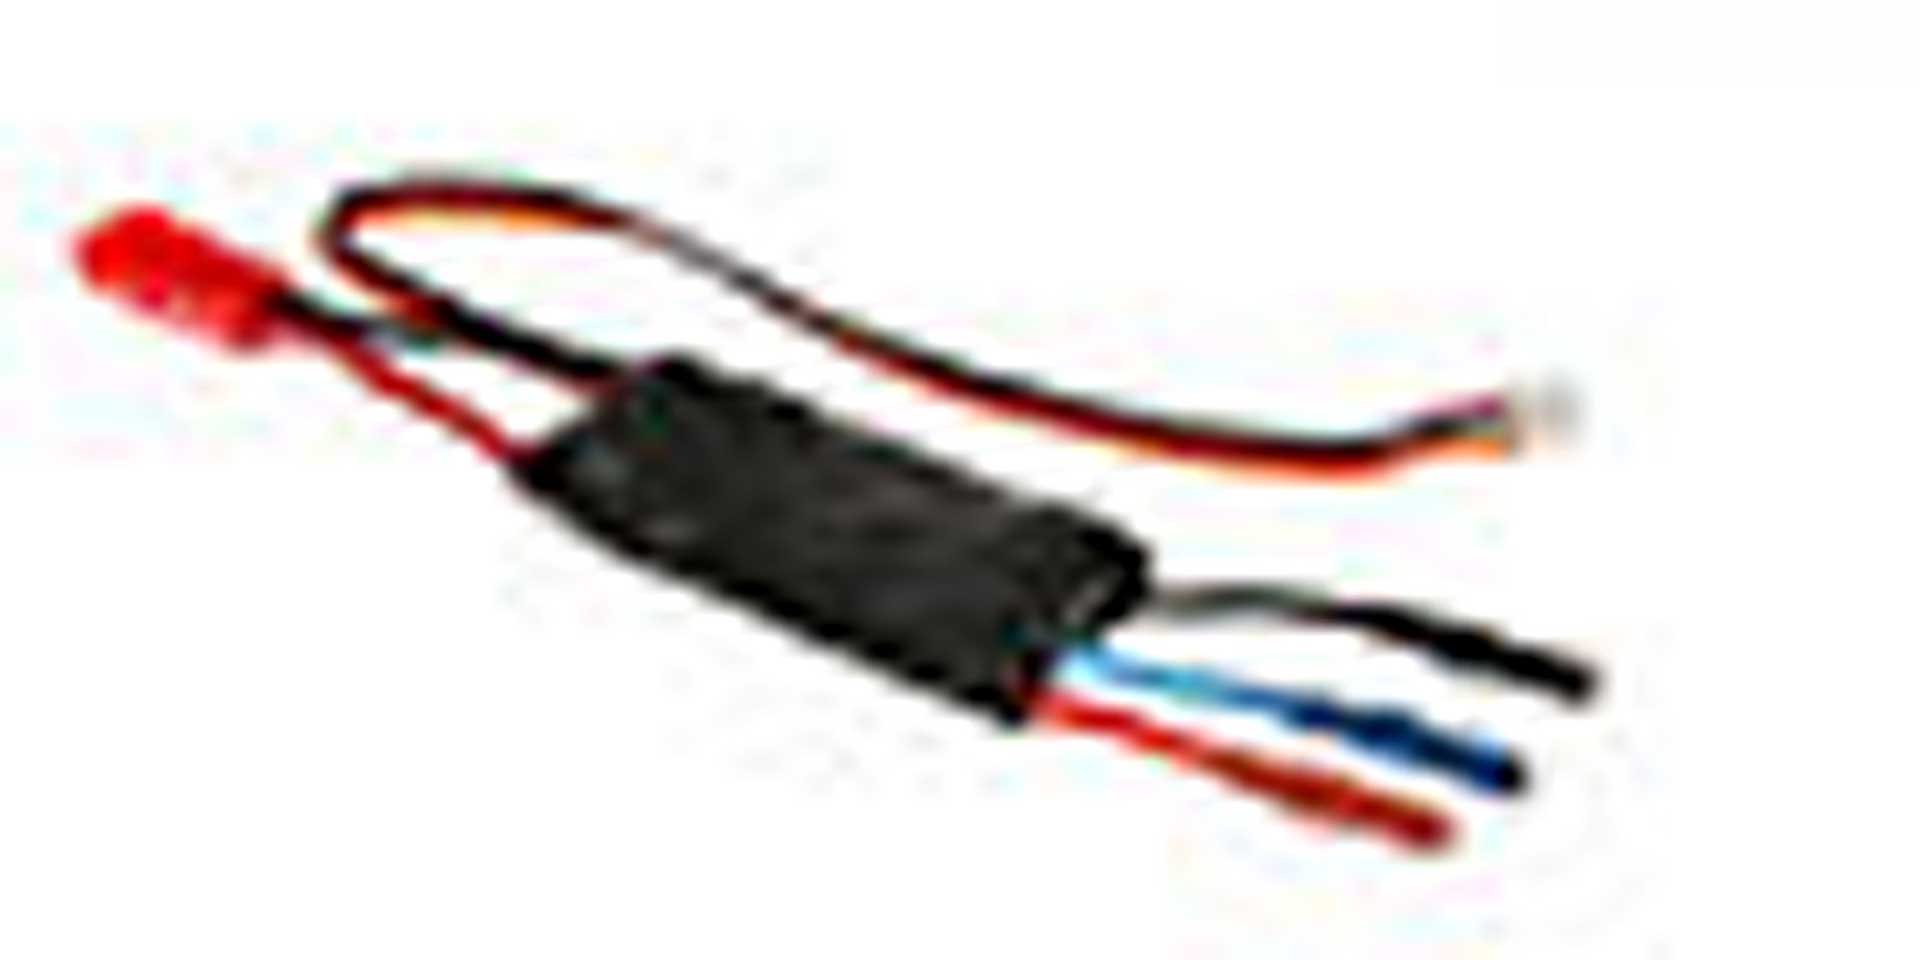 BLADE 20A Brushless ESC: Fusion 180